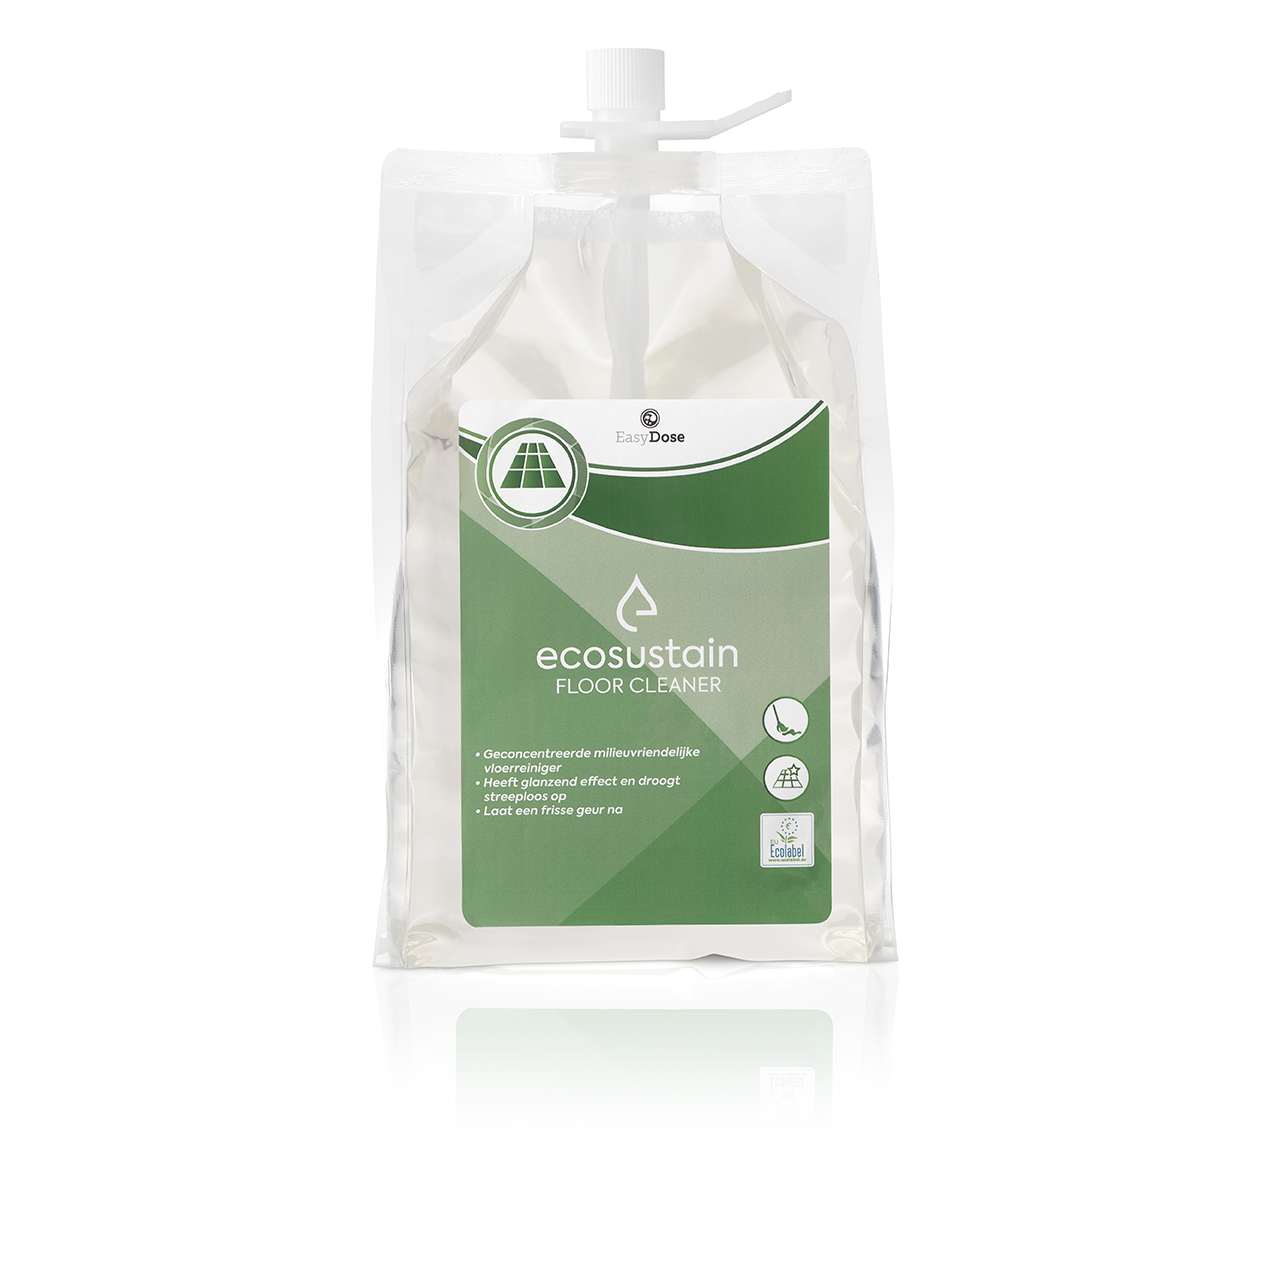 101075-05 Ecosustain Floor Cleaner 1,8 ltr pouch (10)